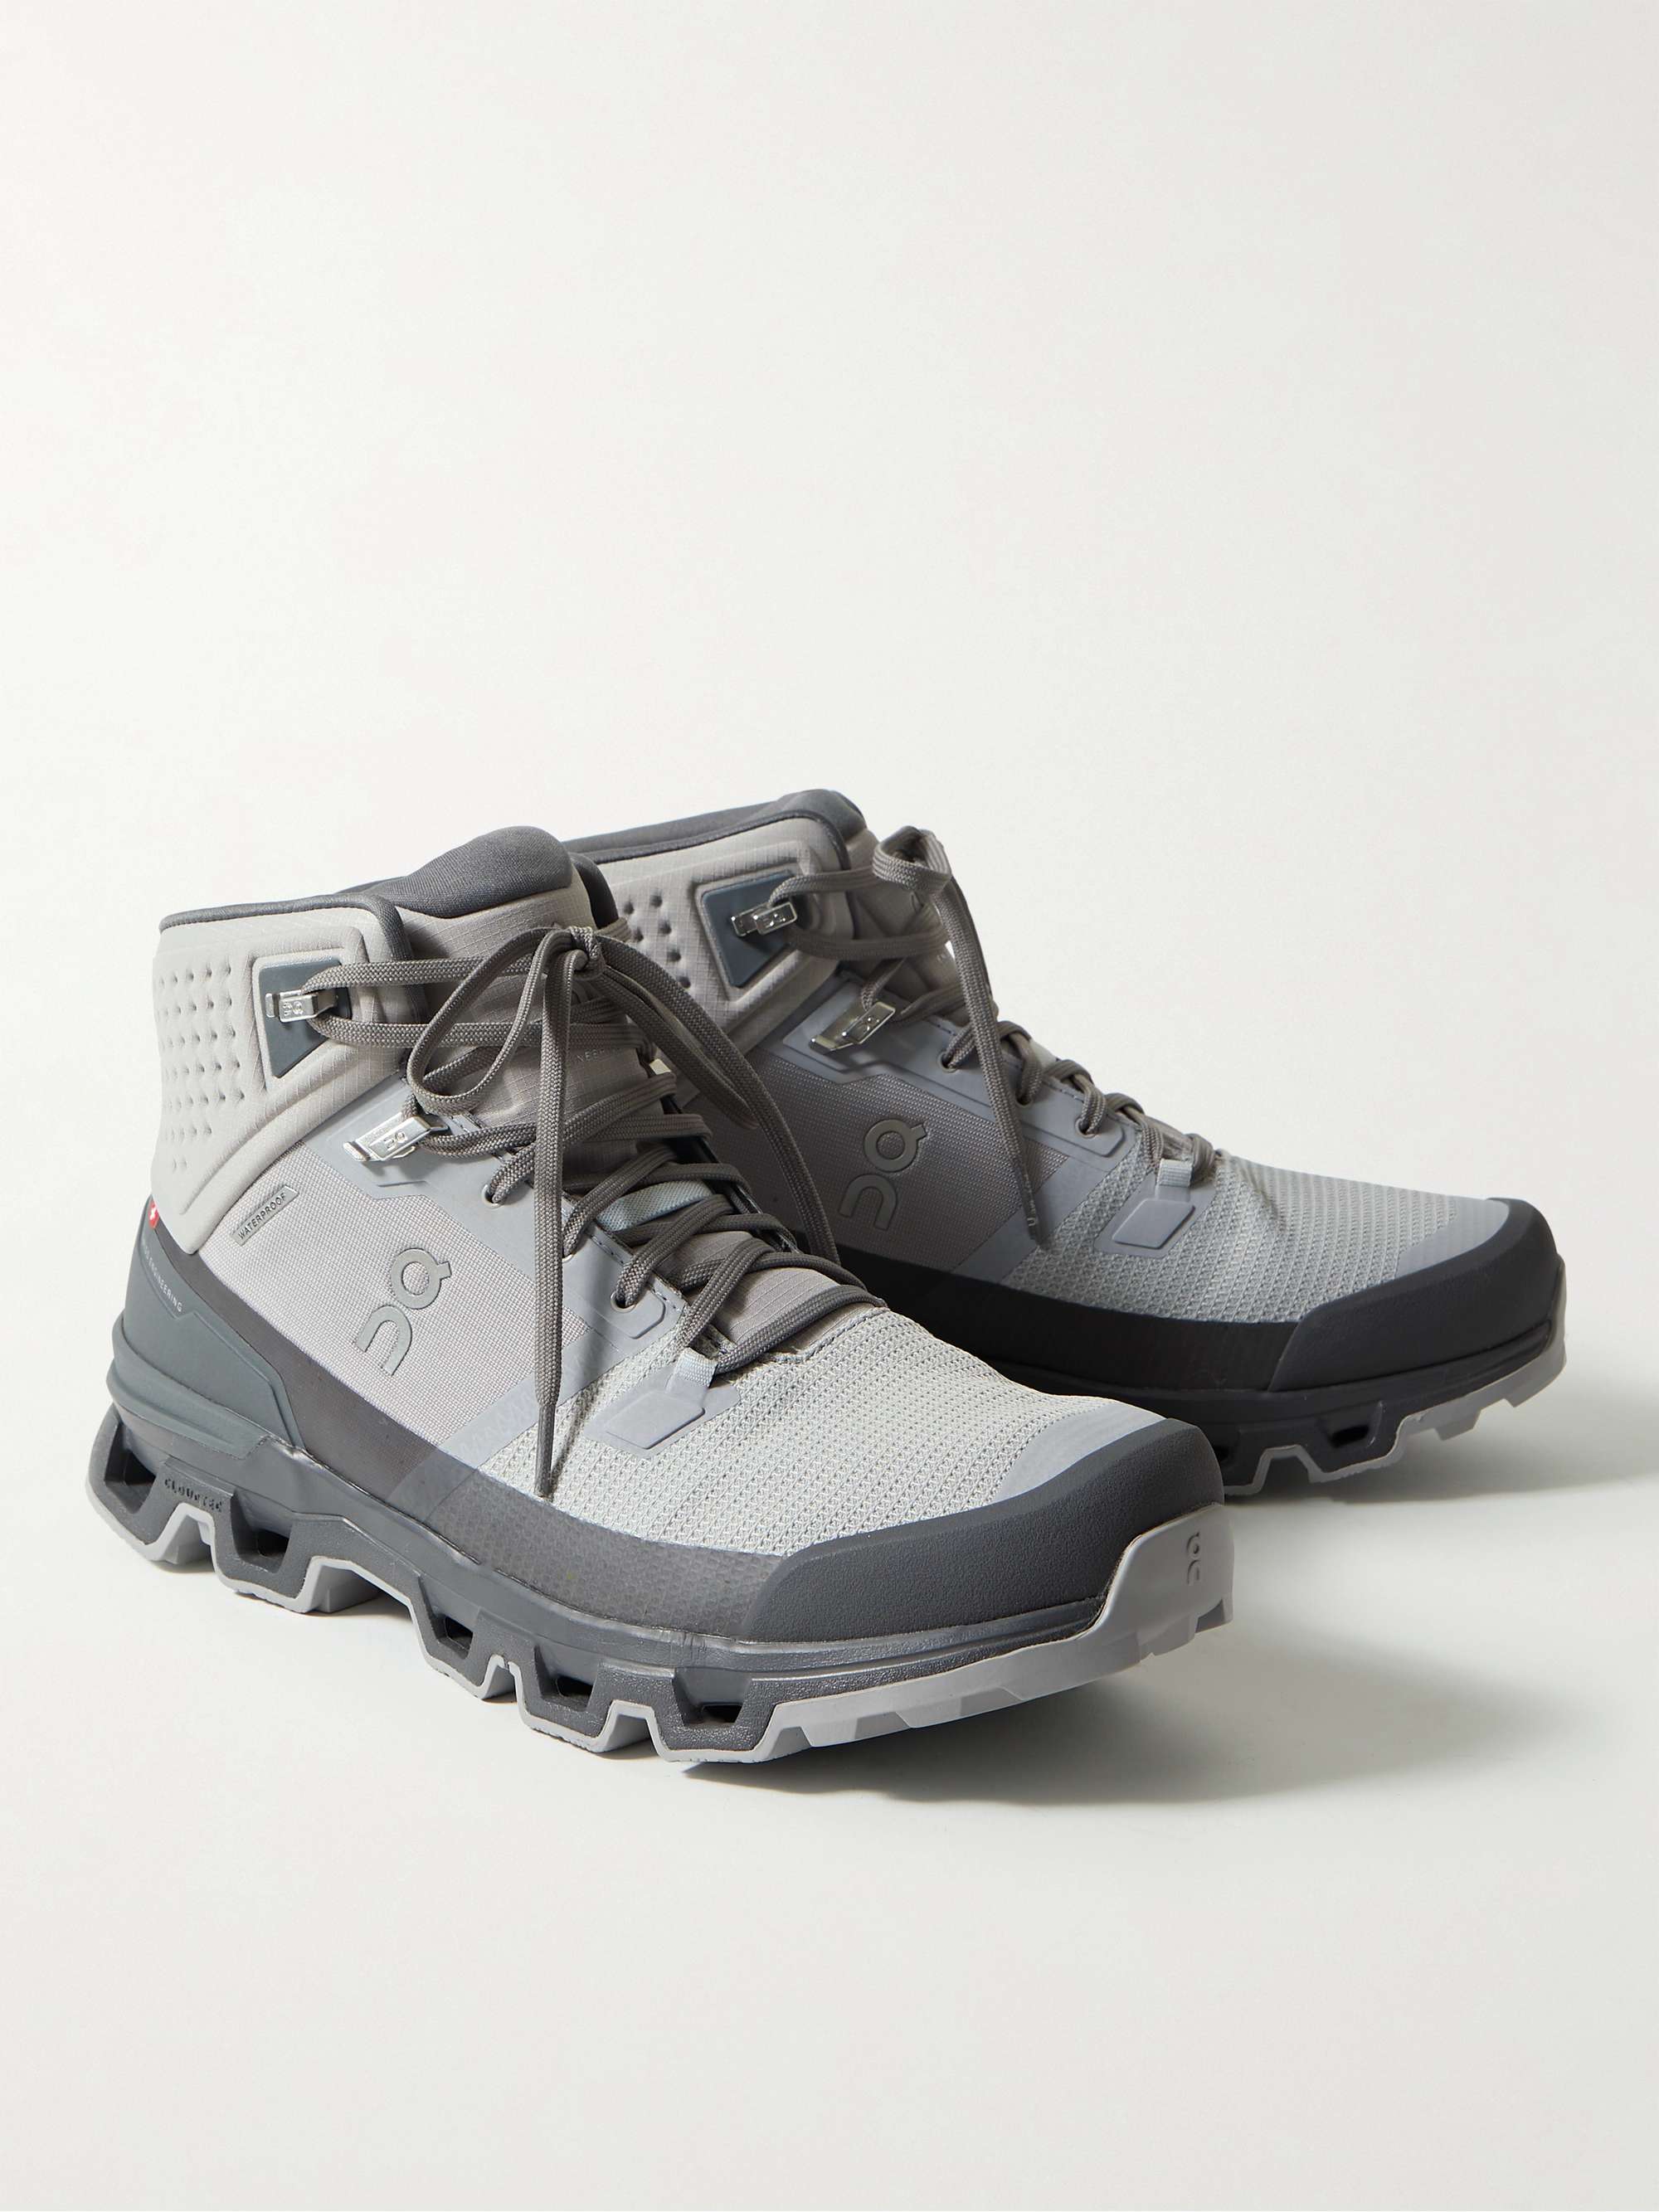 ON-RUNNING Cloudrock Waterproof Rubber-Trimmed Mesh Boots